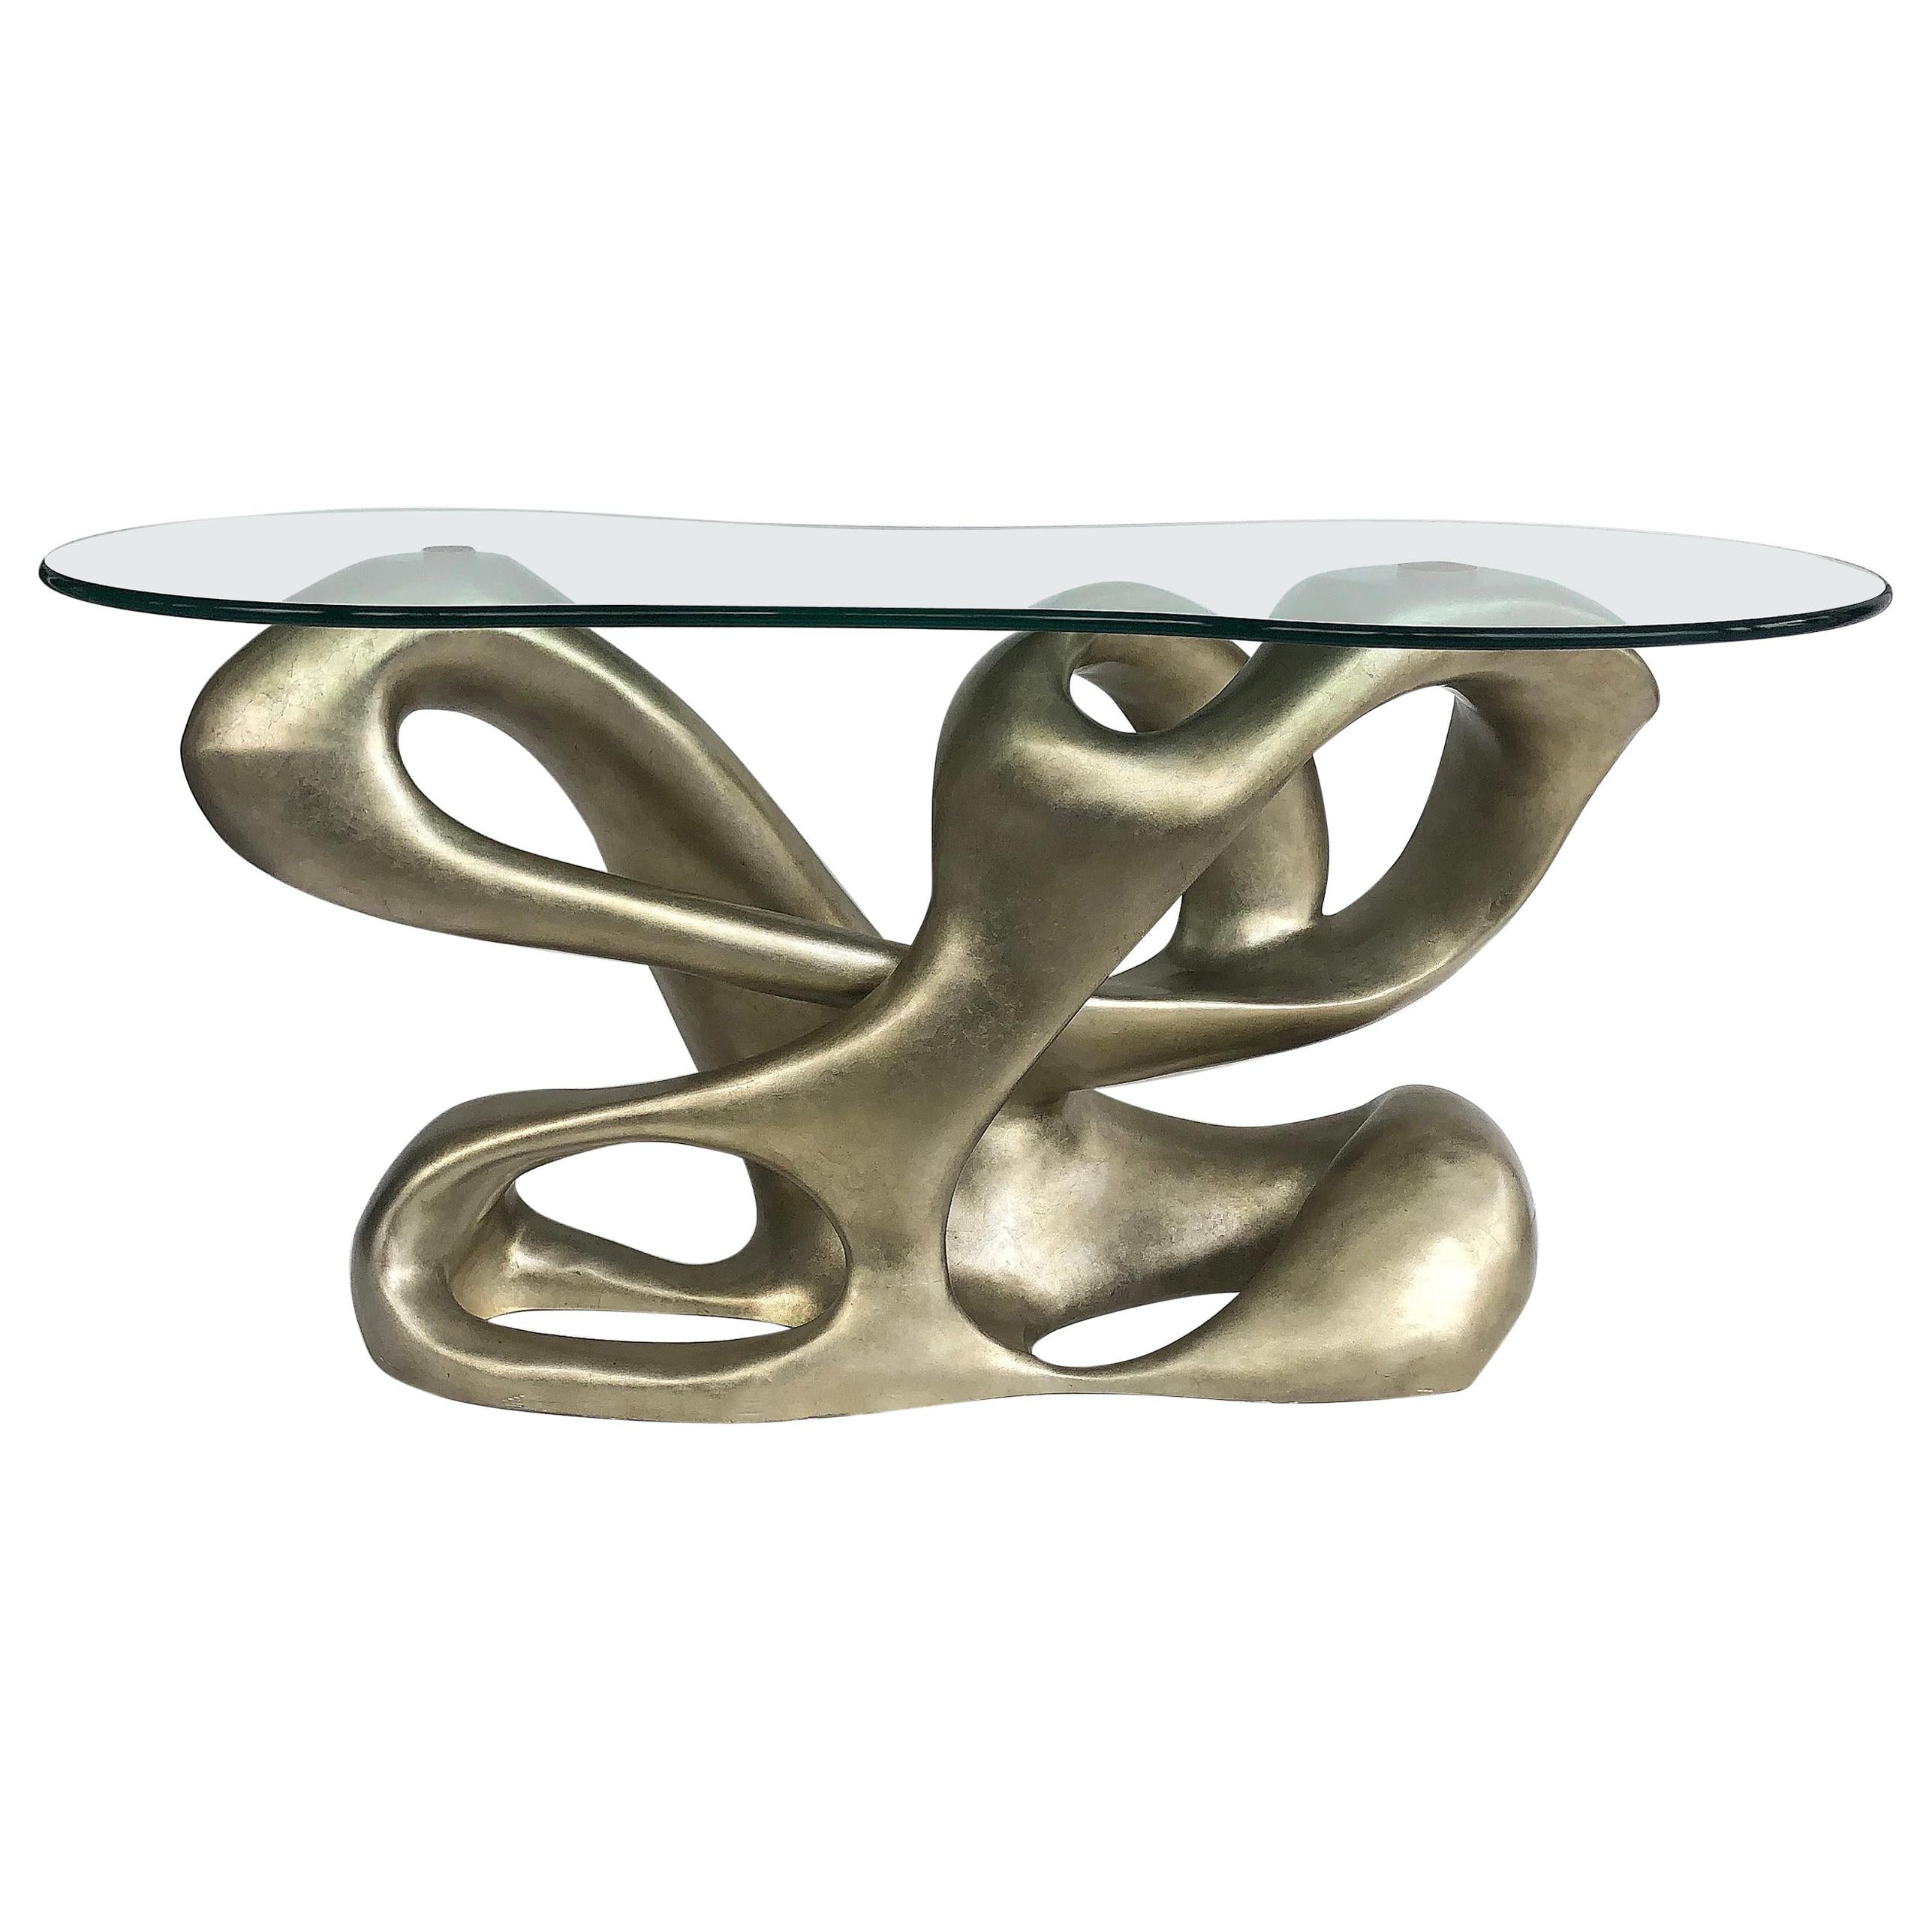 Tony Duquette for Baker Biomorphic Console, Silver Leaf Finish